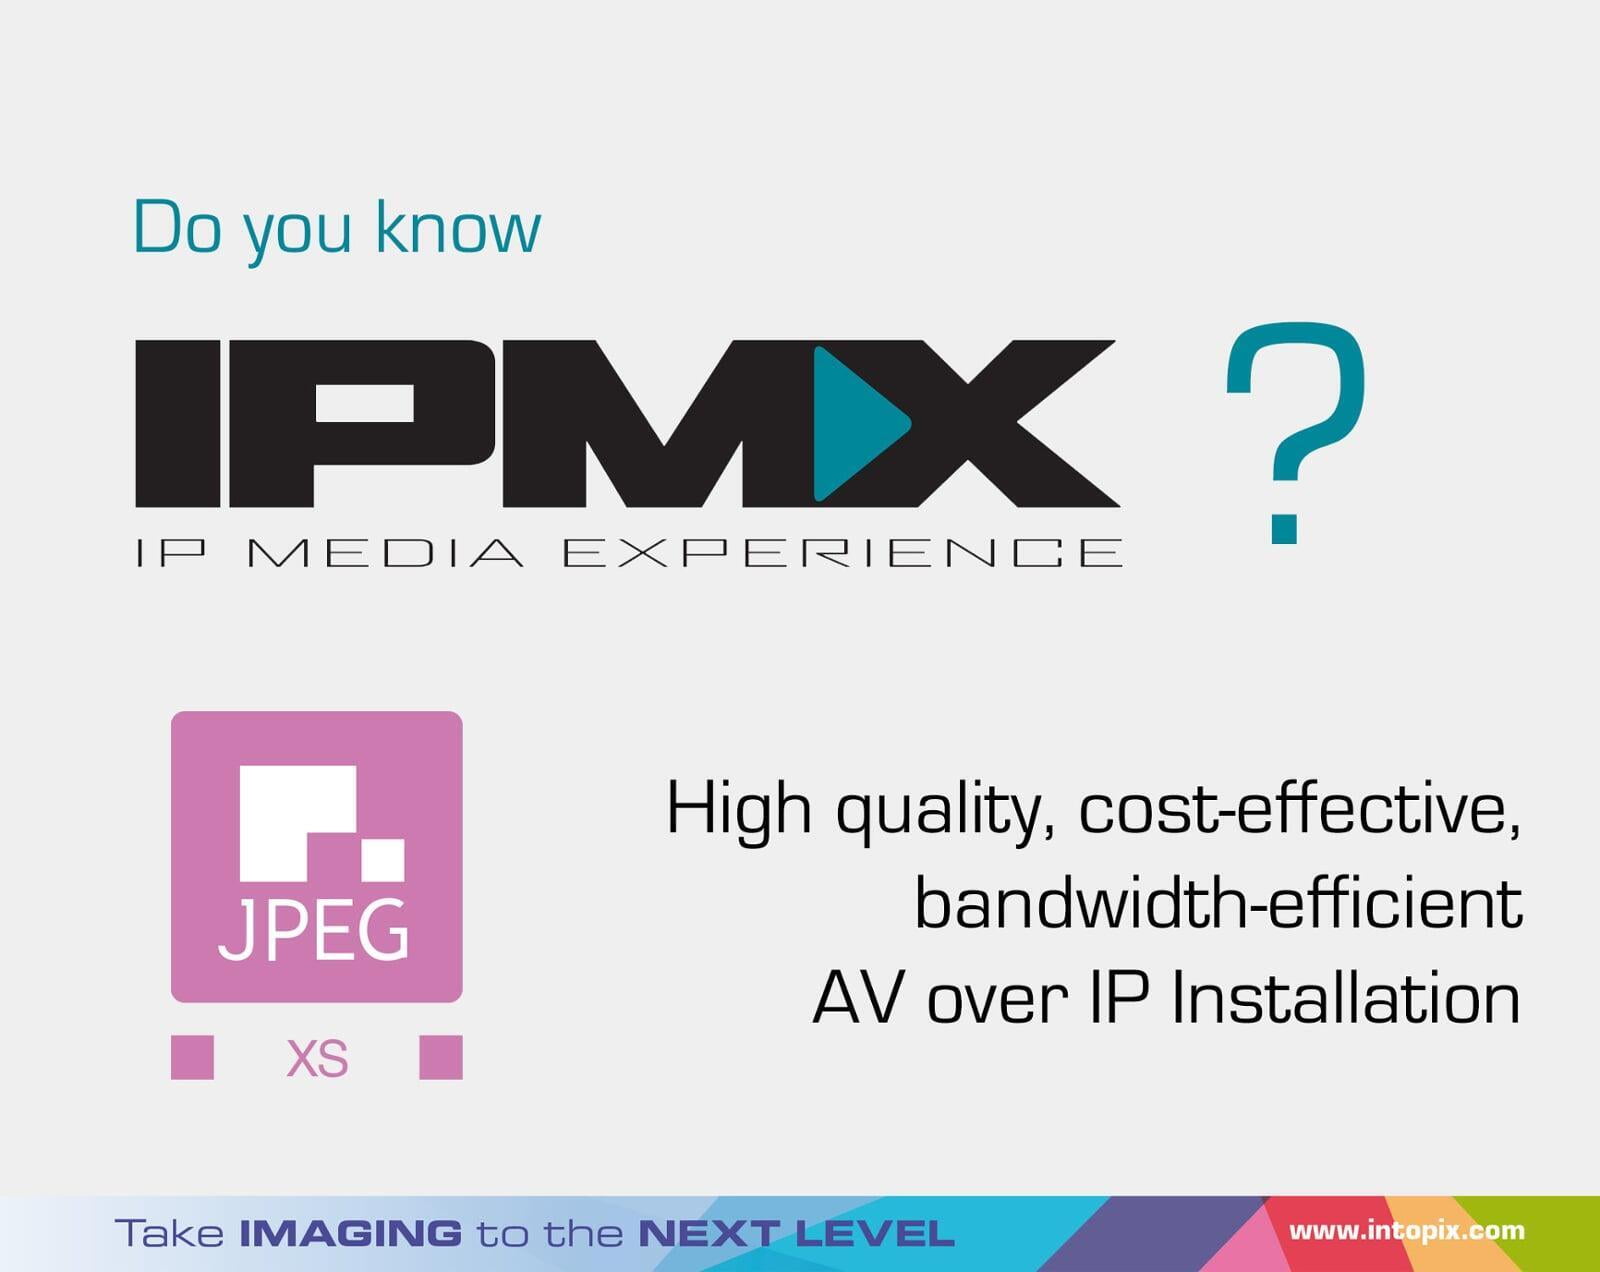 Do you know what IPMX means?